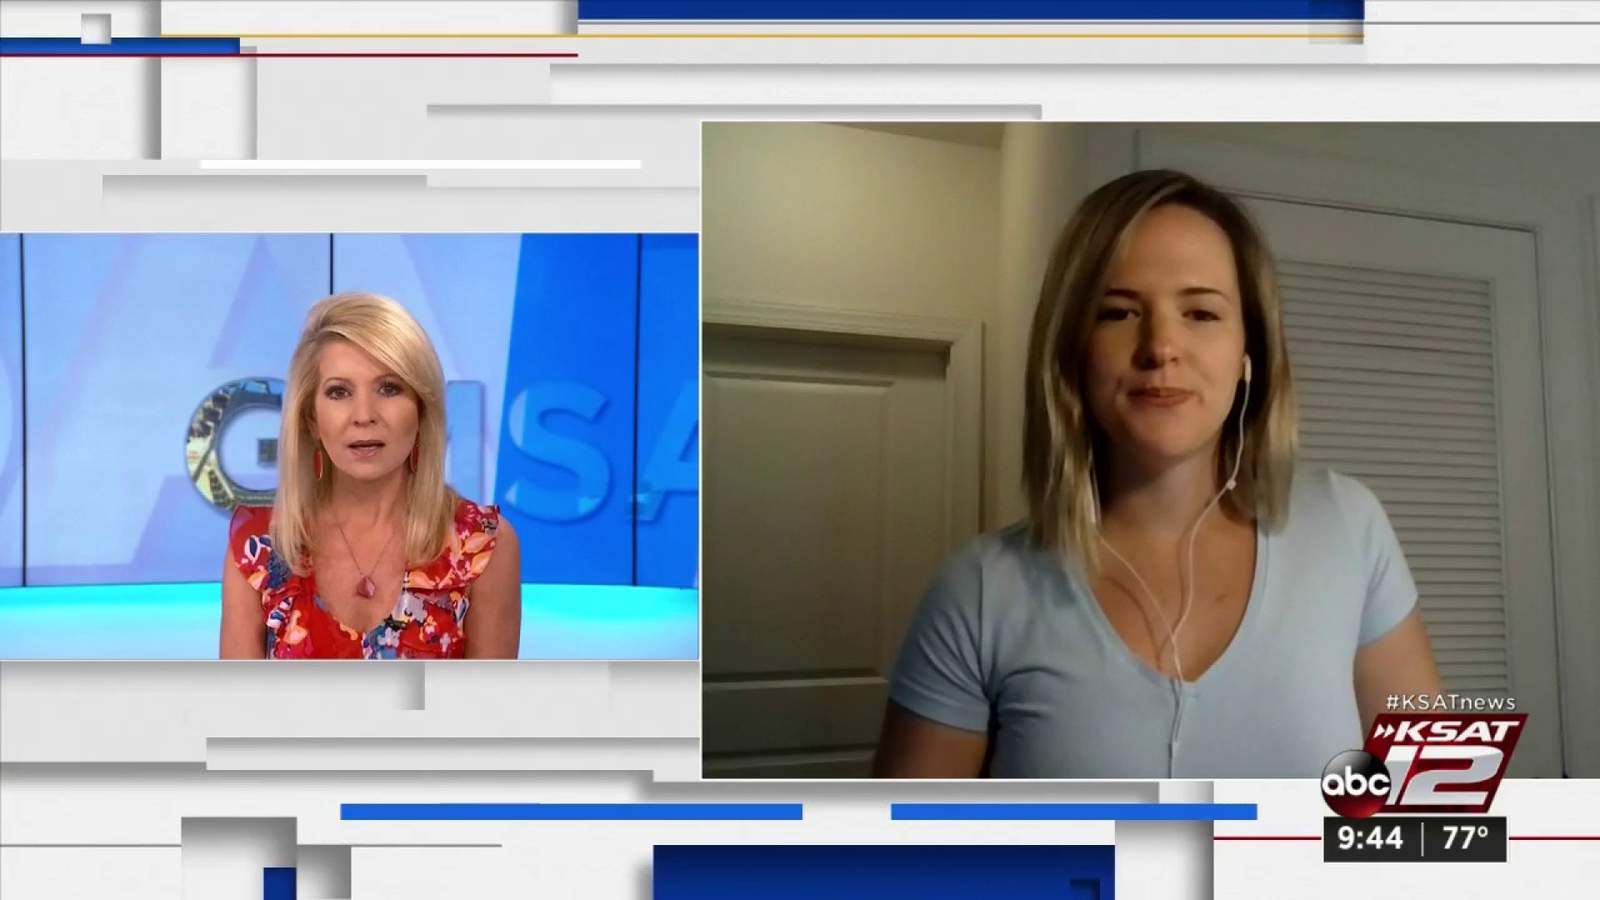 WATCH: GMSA@9 anchor Leslie Mouton talks to a family member about COVID-19